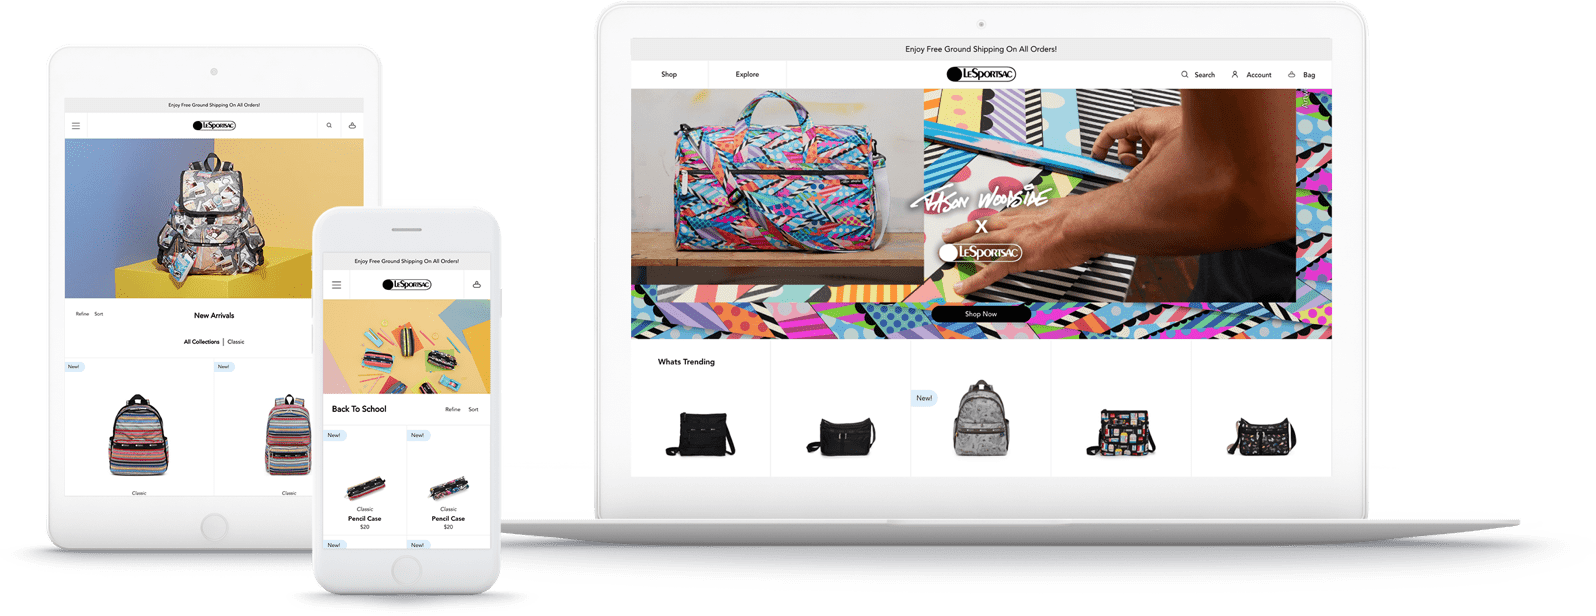 LeSportsac grew orders 37% through multi-channel ecommerce — Shopify ...